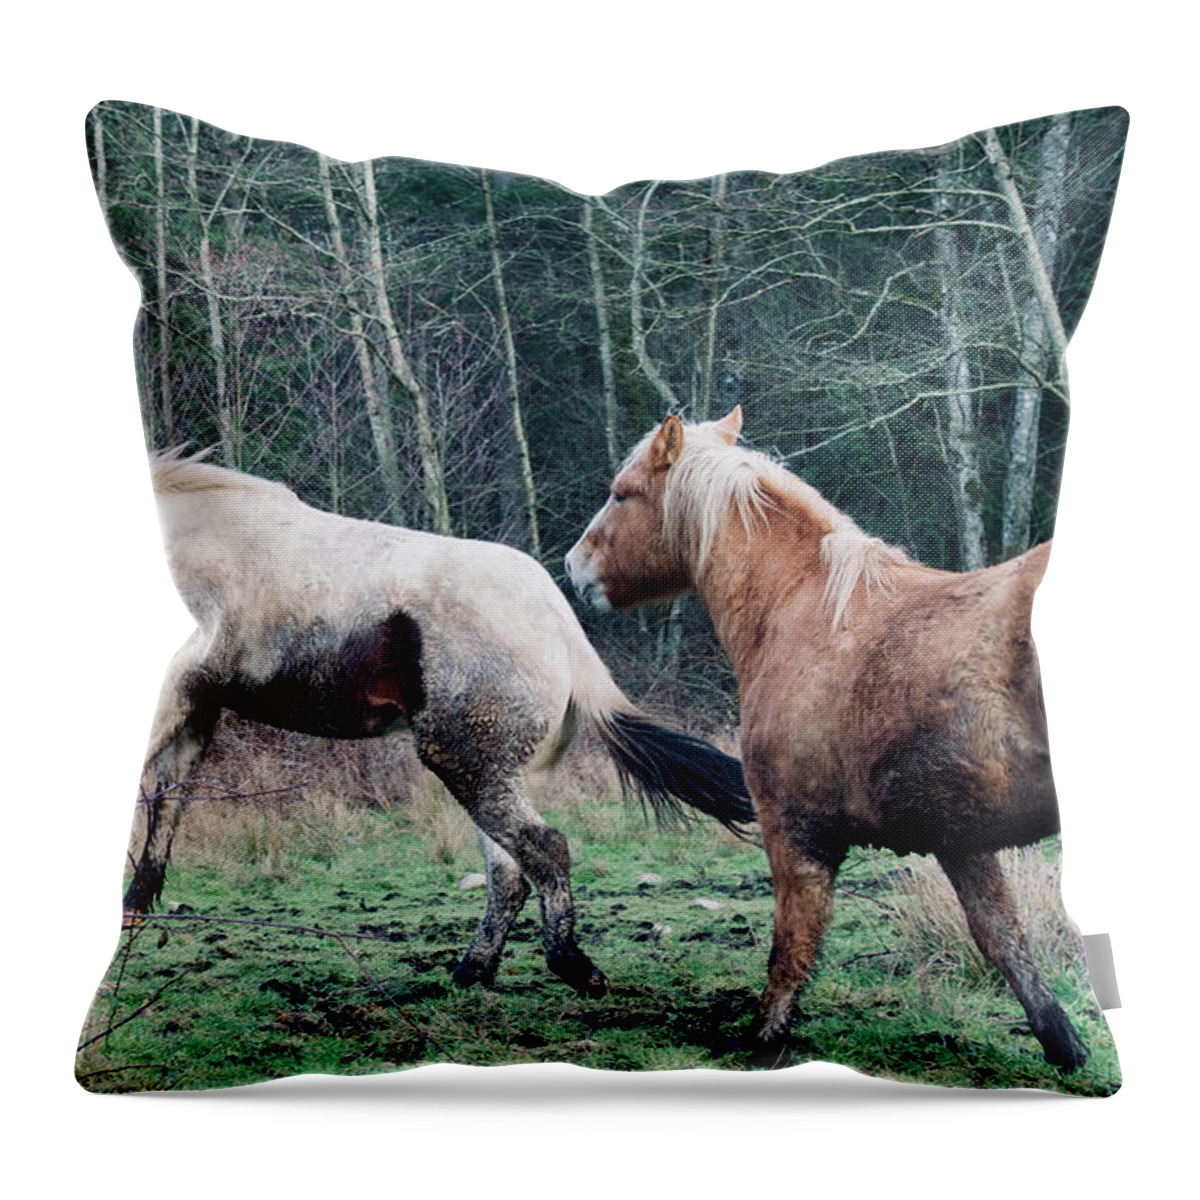 Paint Horse Throw Pillow featuring the photograph Lads Playing by Listen To Your Horse